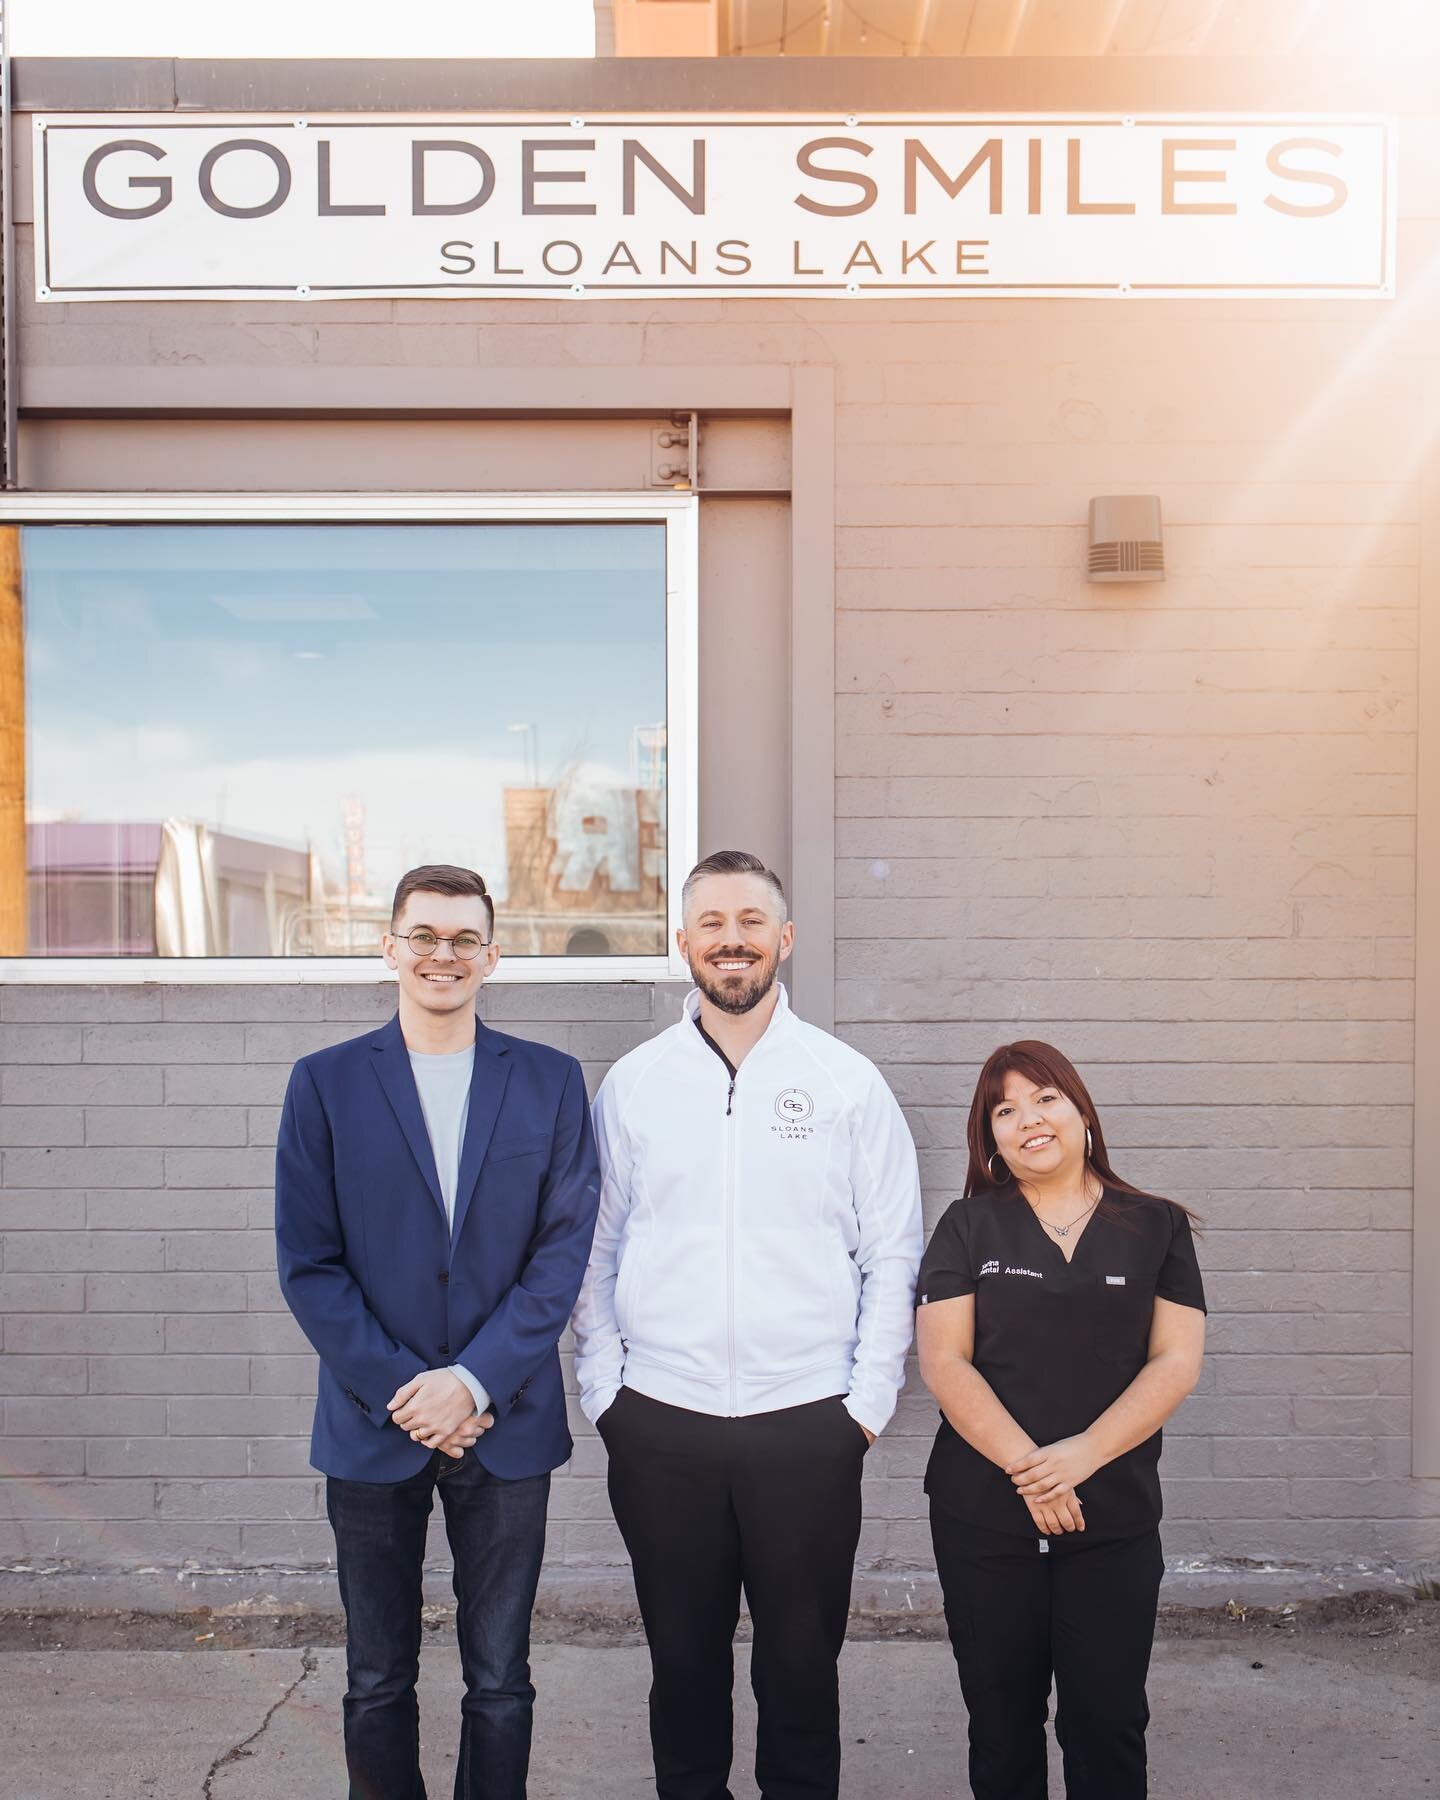 We are currently accepting new patients! Our team at Golden Smiles knows that going to the dentist is not at the top of everyone's list, but we strive to make your new patient experience with us as smooth and seamless as possible.  From online schedu